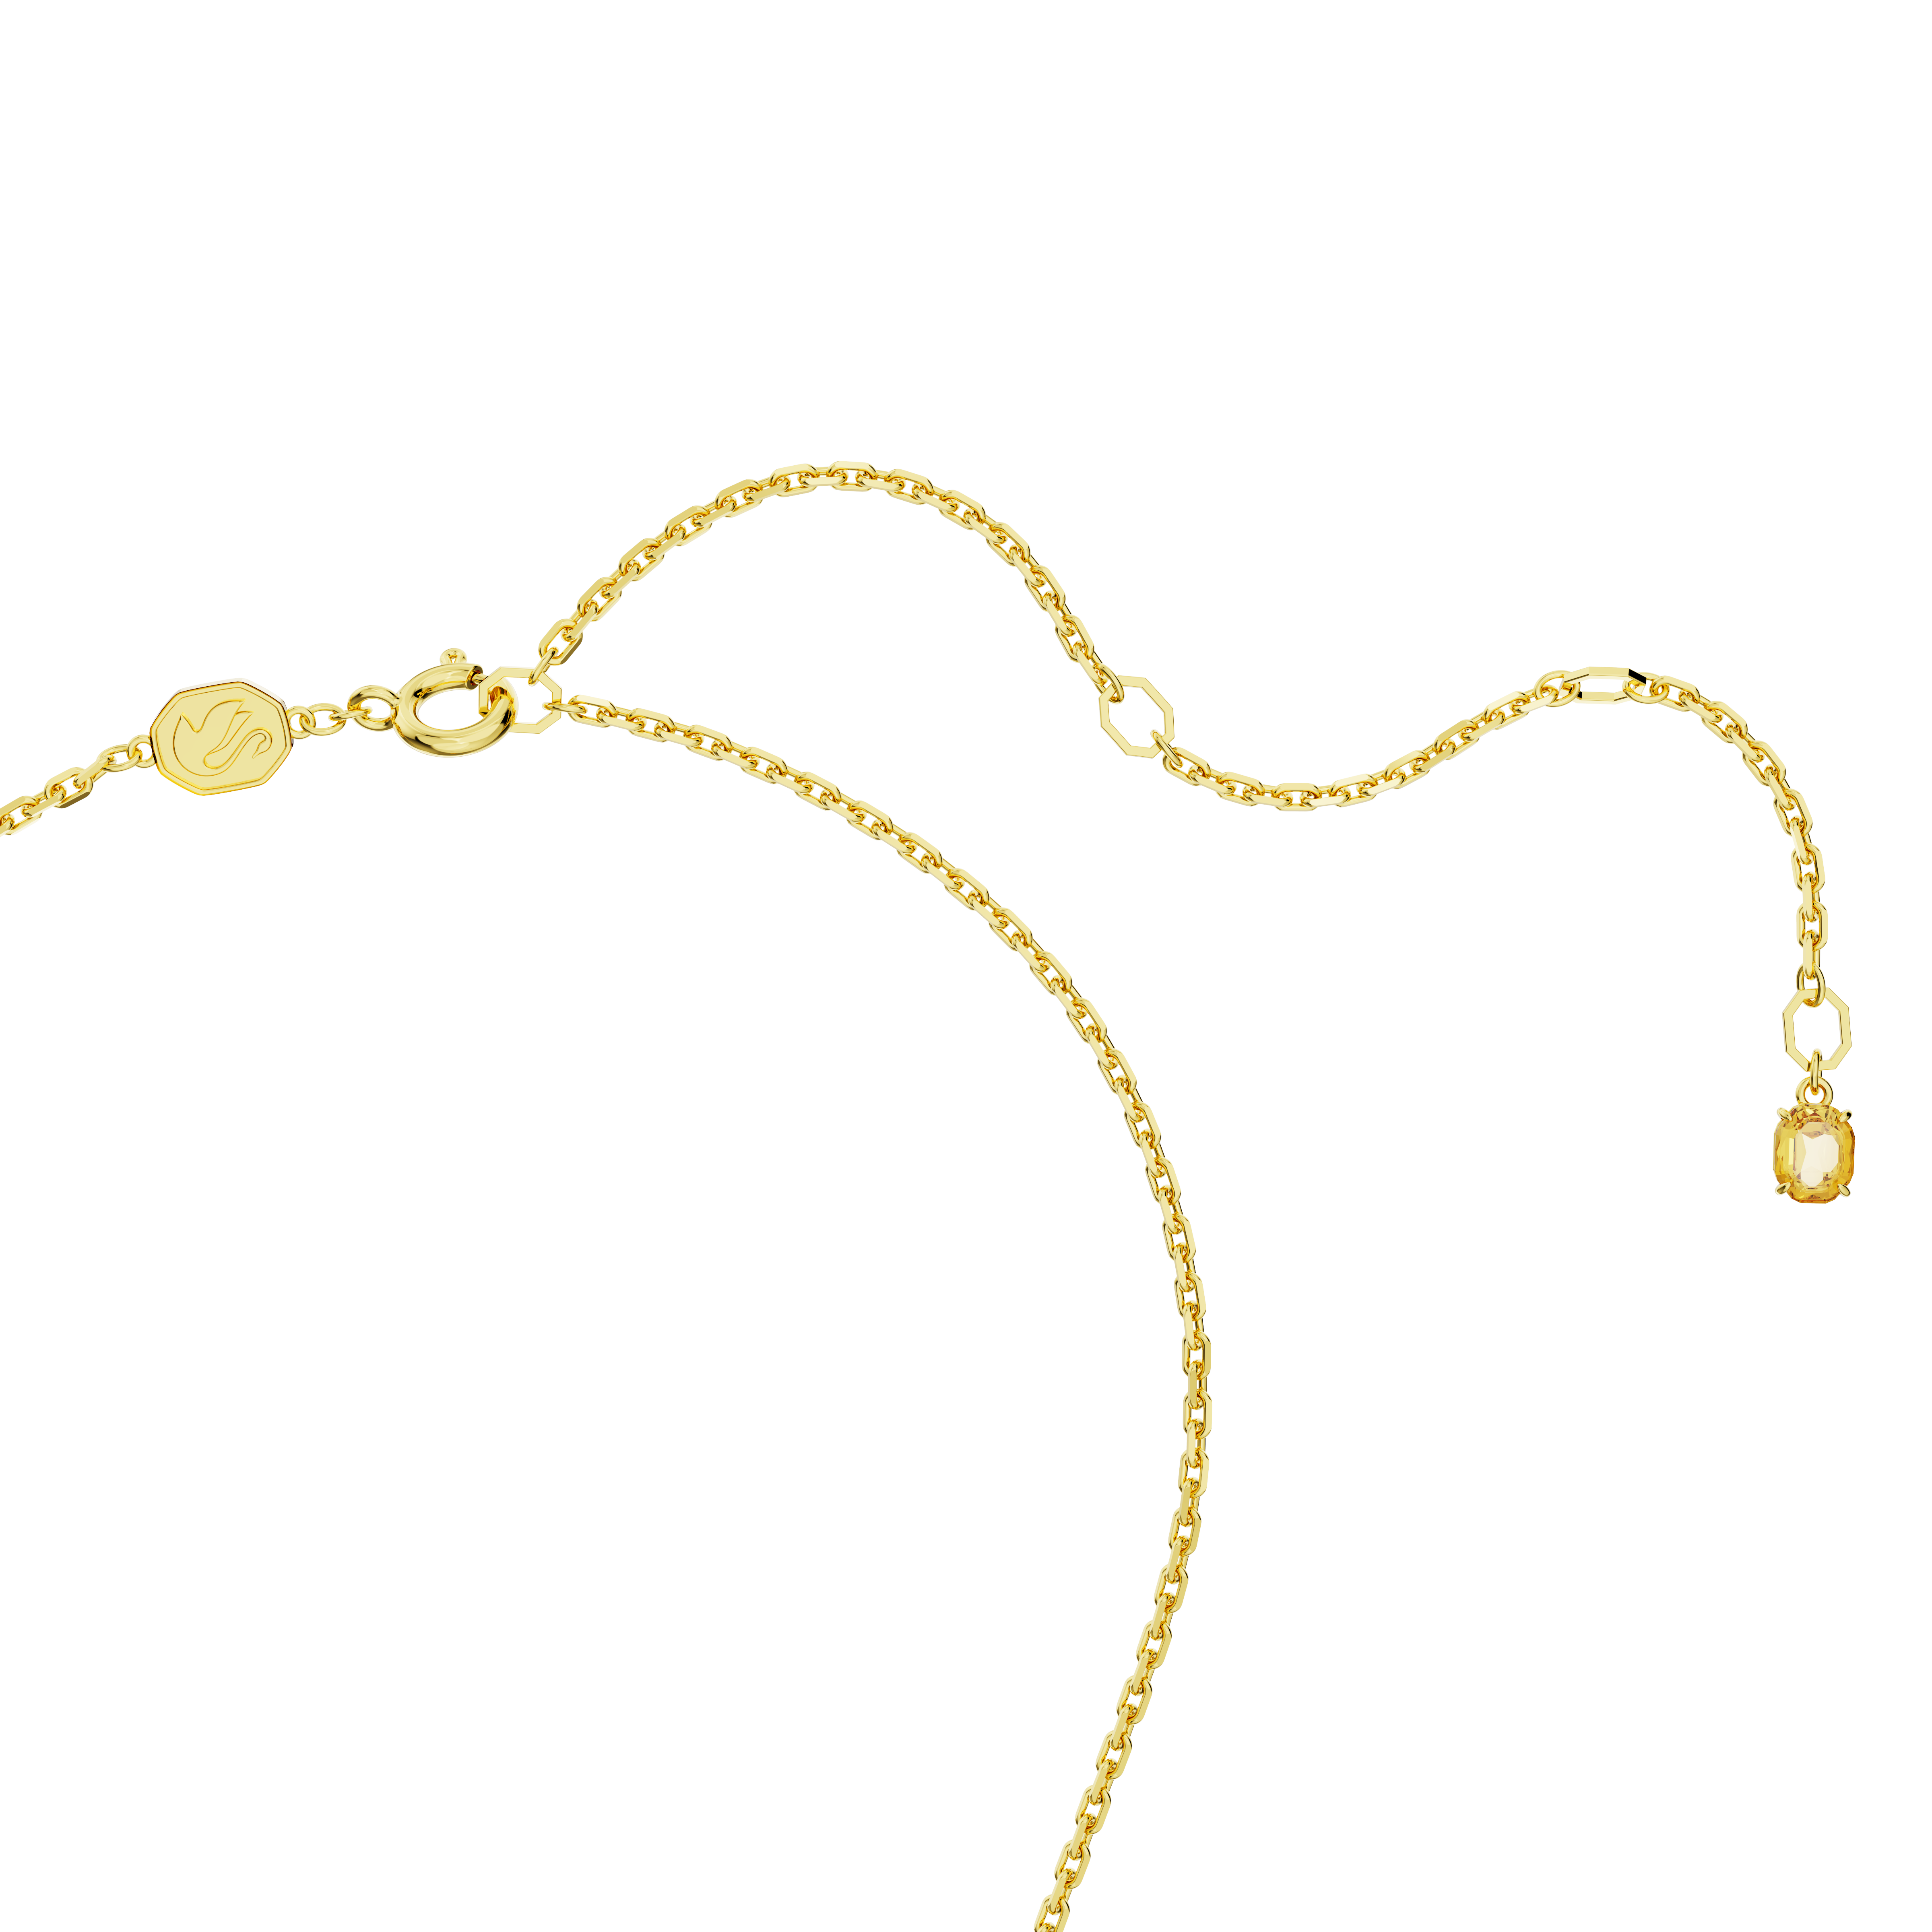 SWAROVSKI FLORERE NECKLACE, FLOWER, YELLOW, GOLD-TONE PLATED 5650570